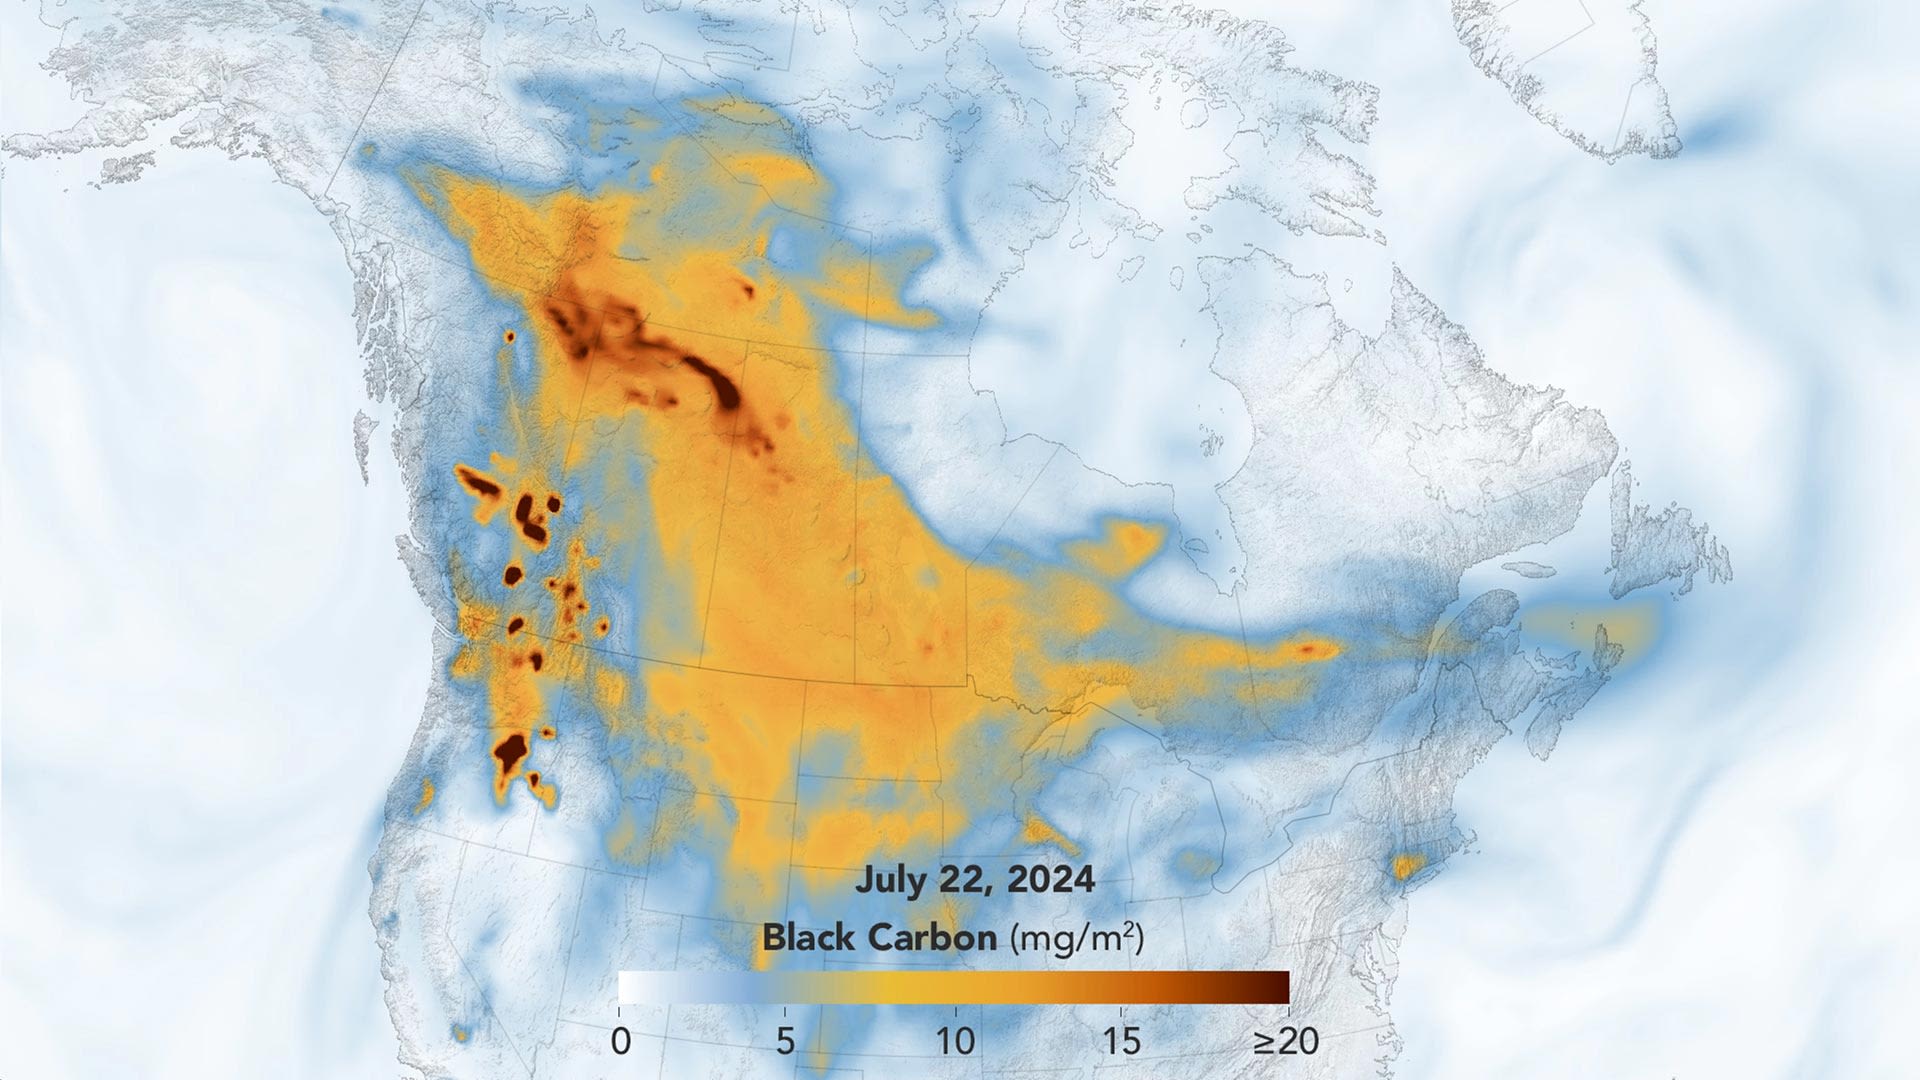 Smoke from Hundreds of Wildfires Darkens Skies Over Canada and the U.S.